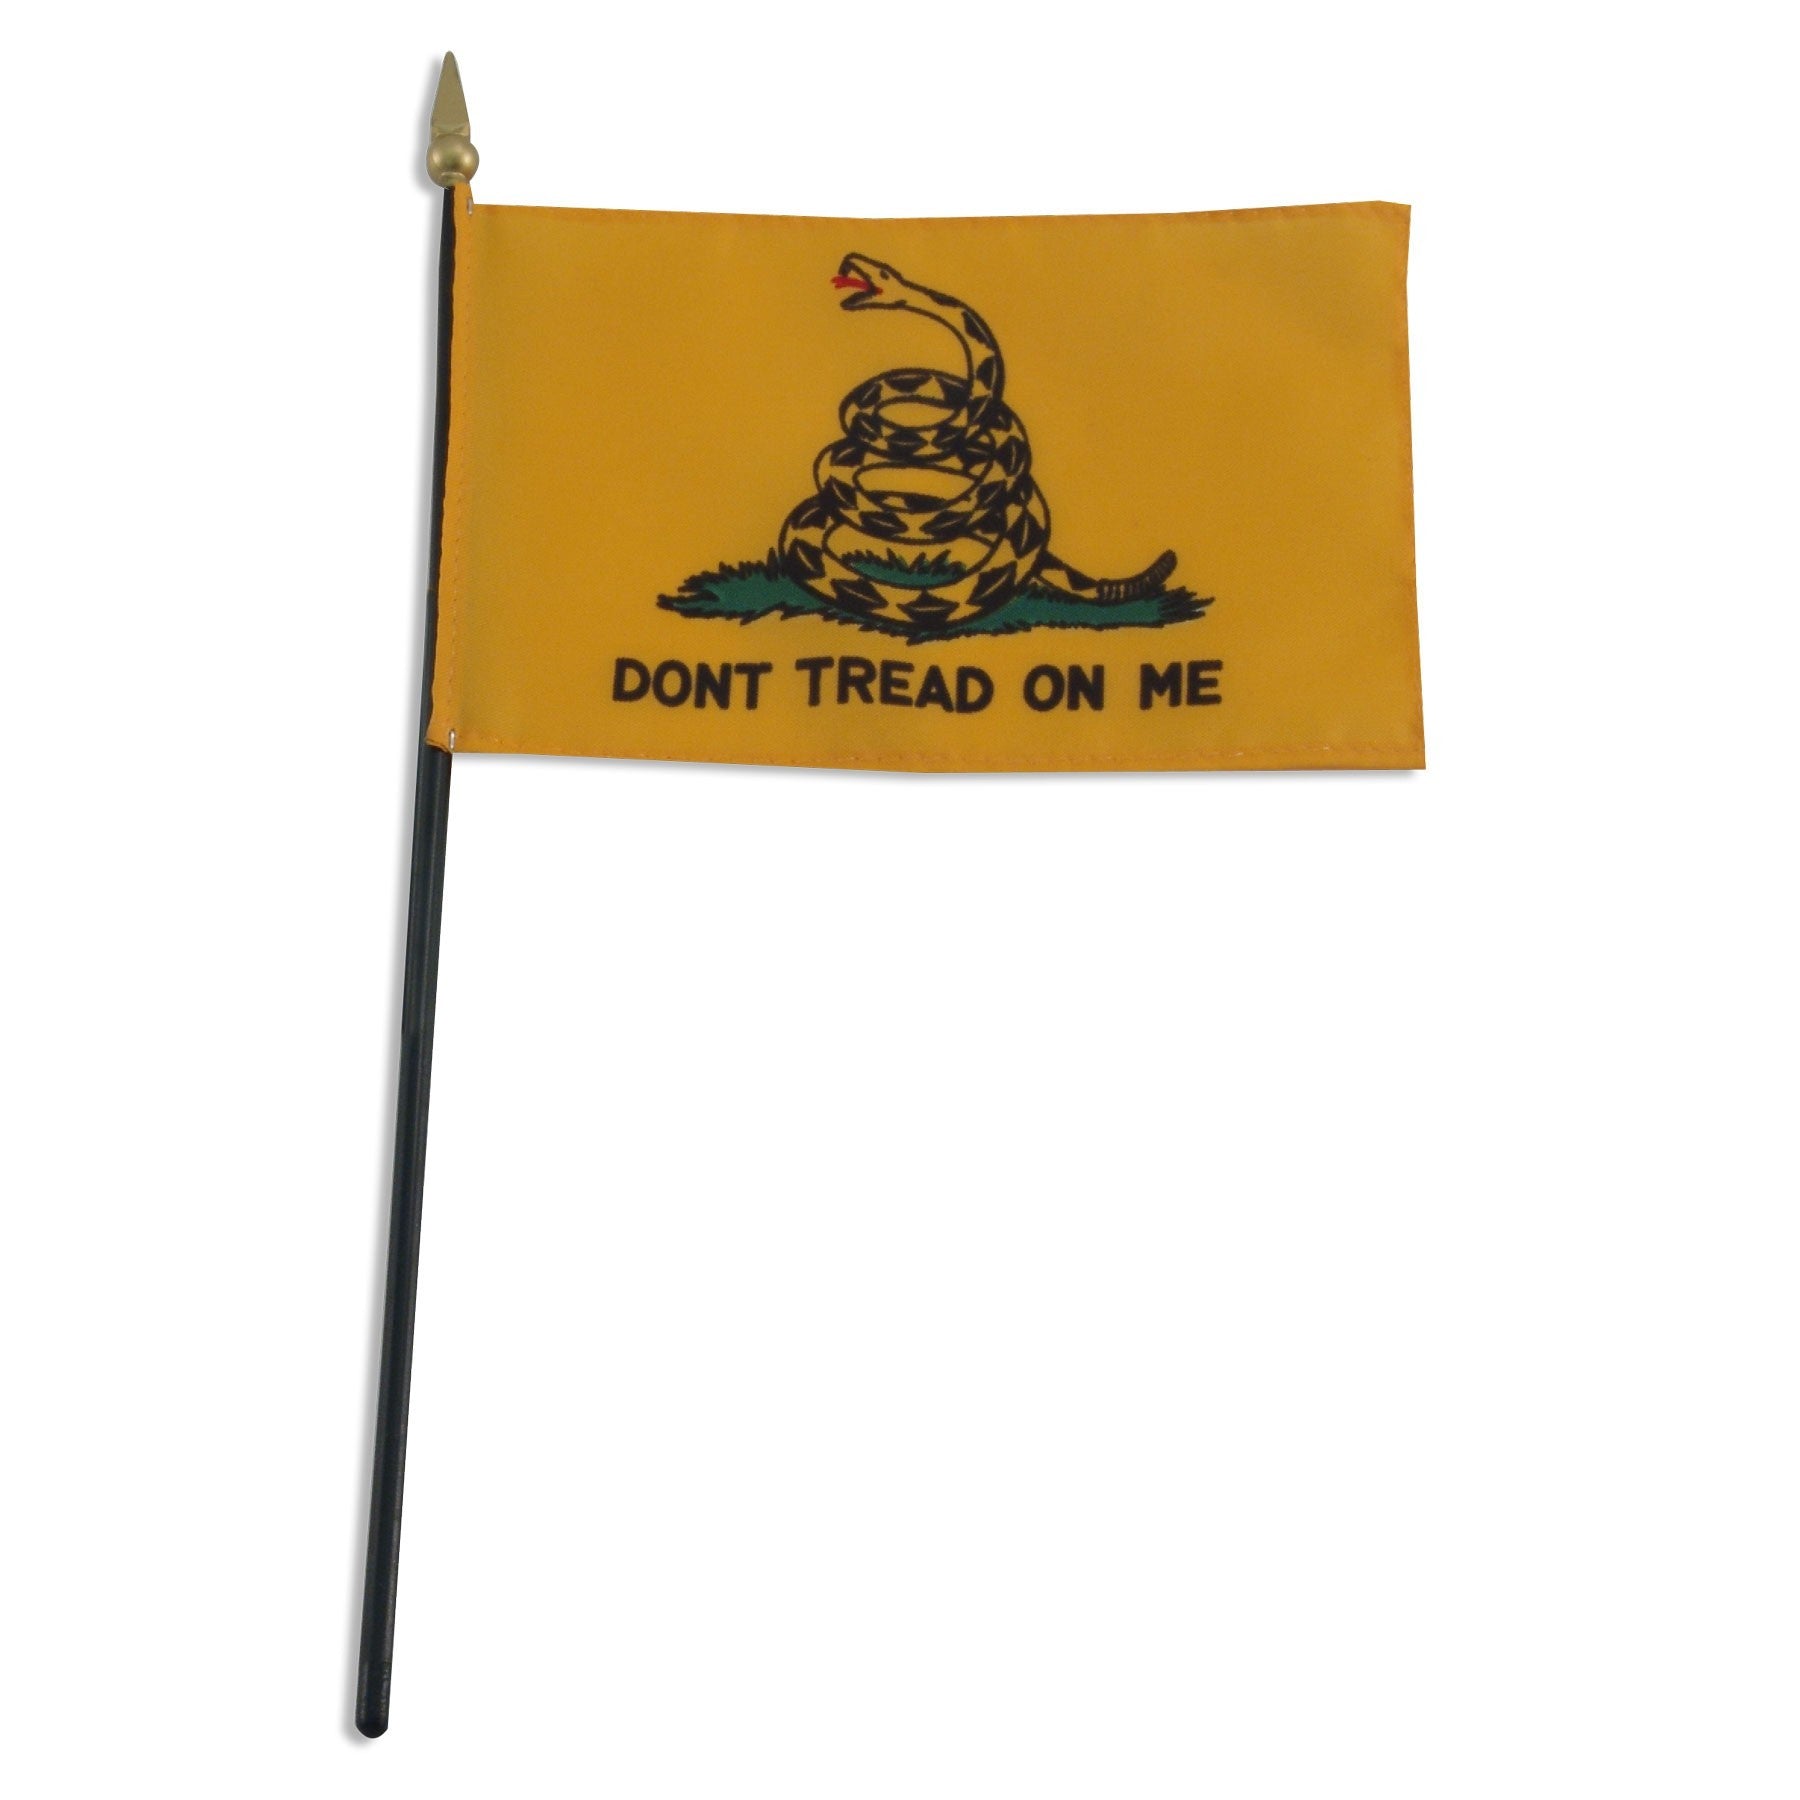 Histoical Gadsden "Don't Tread on Me" 4in x 6in Miniature Handheld Flags